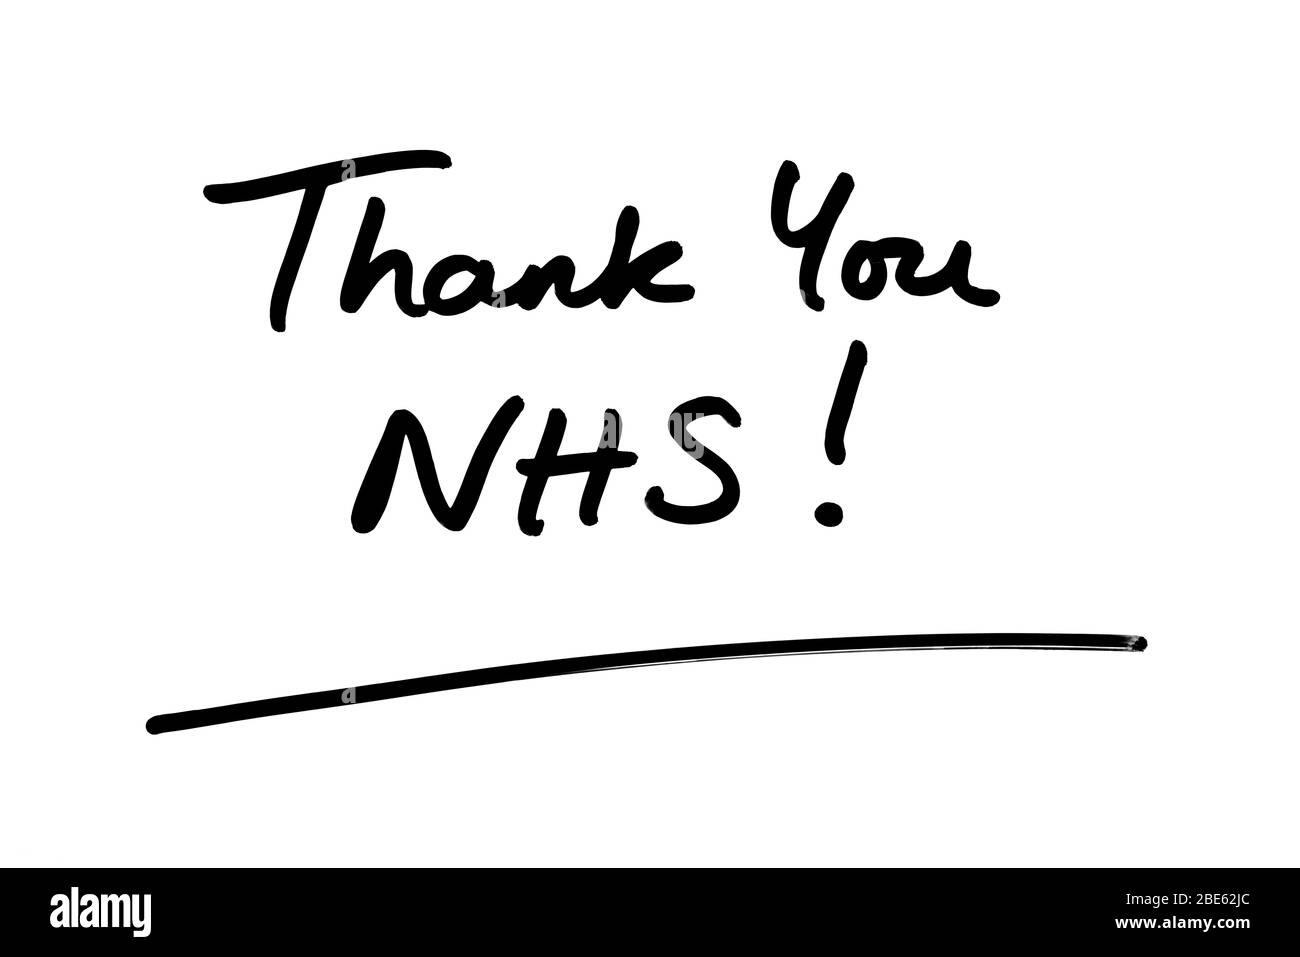 Thank You NHS! handwritten on a white background Stock Photo - Alamy